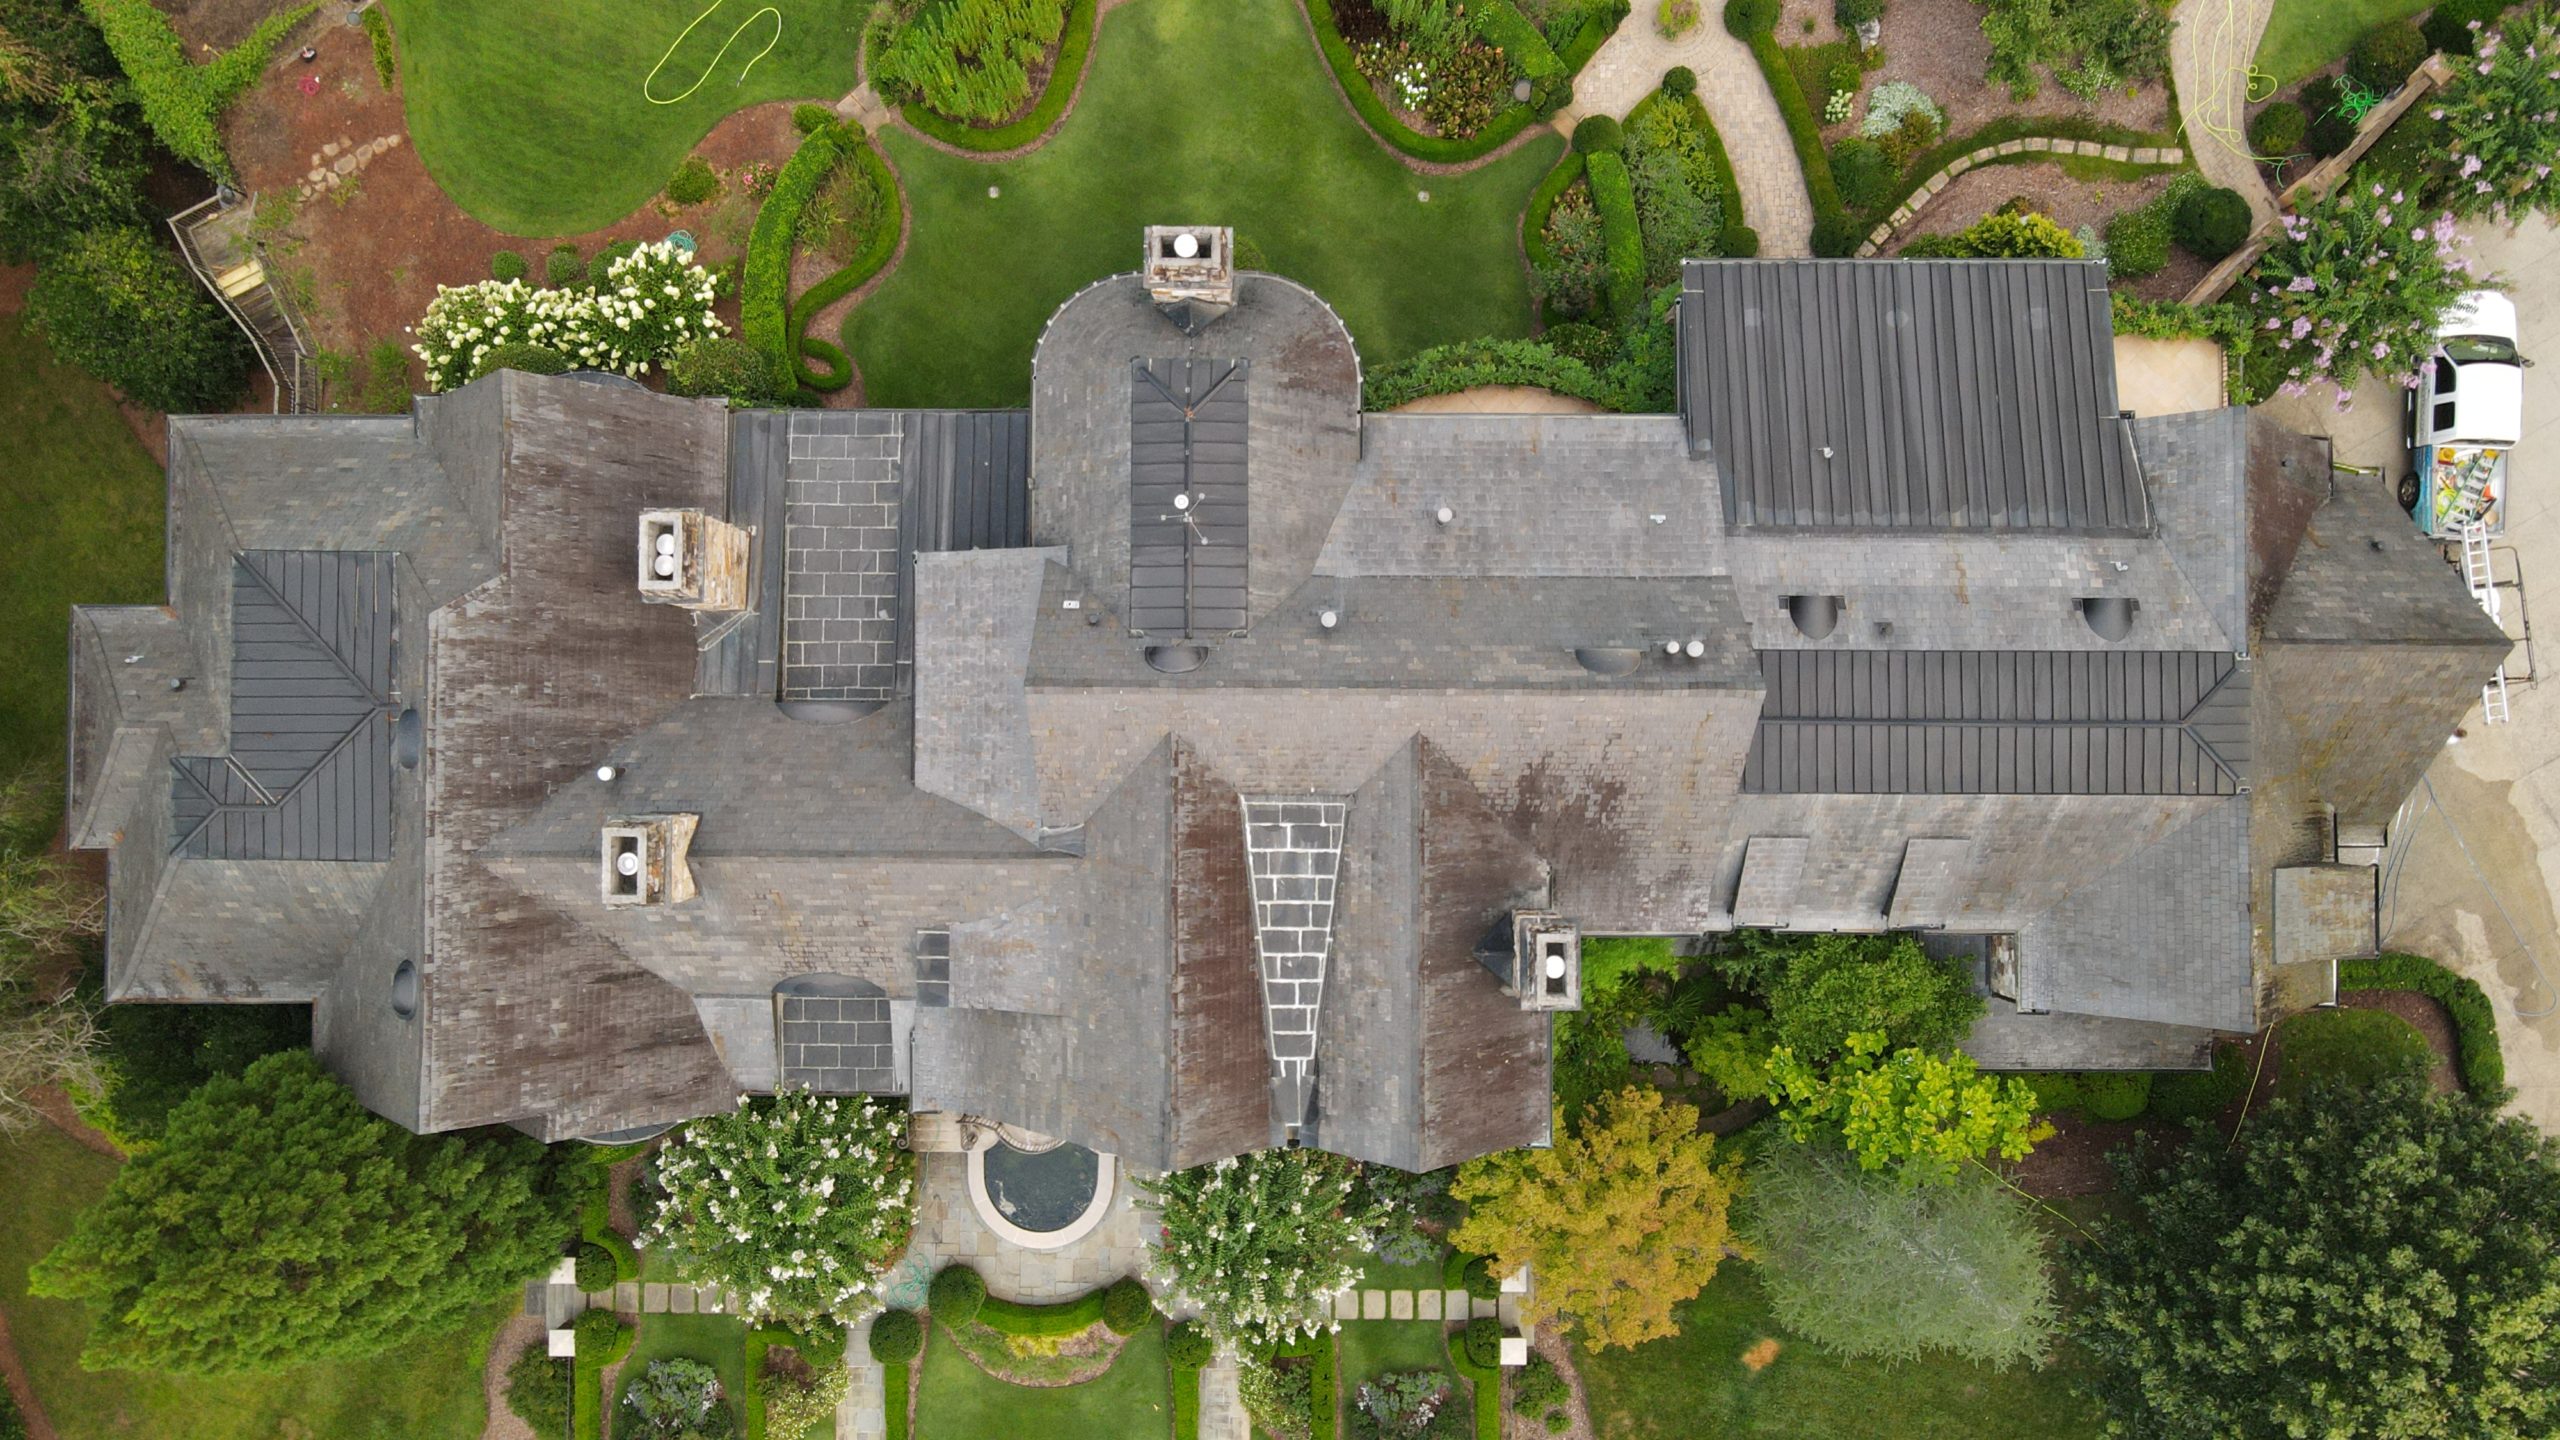 Top View Of The House